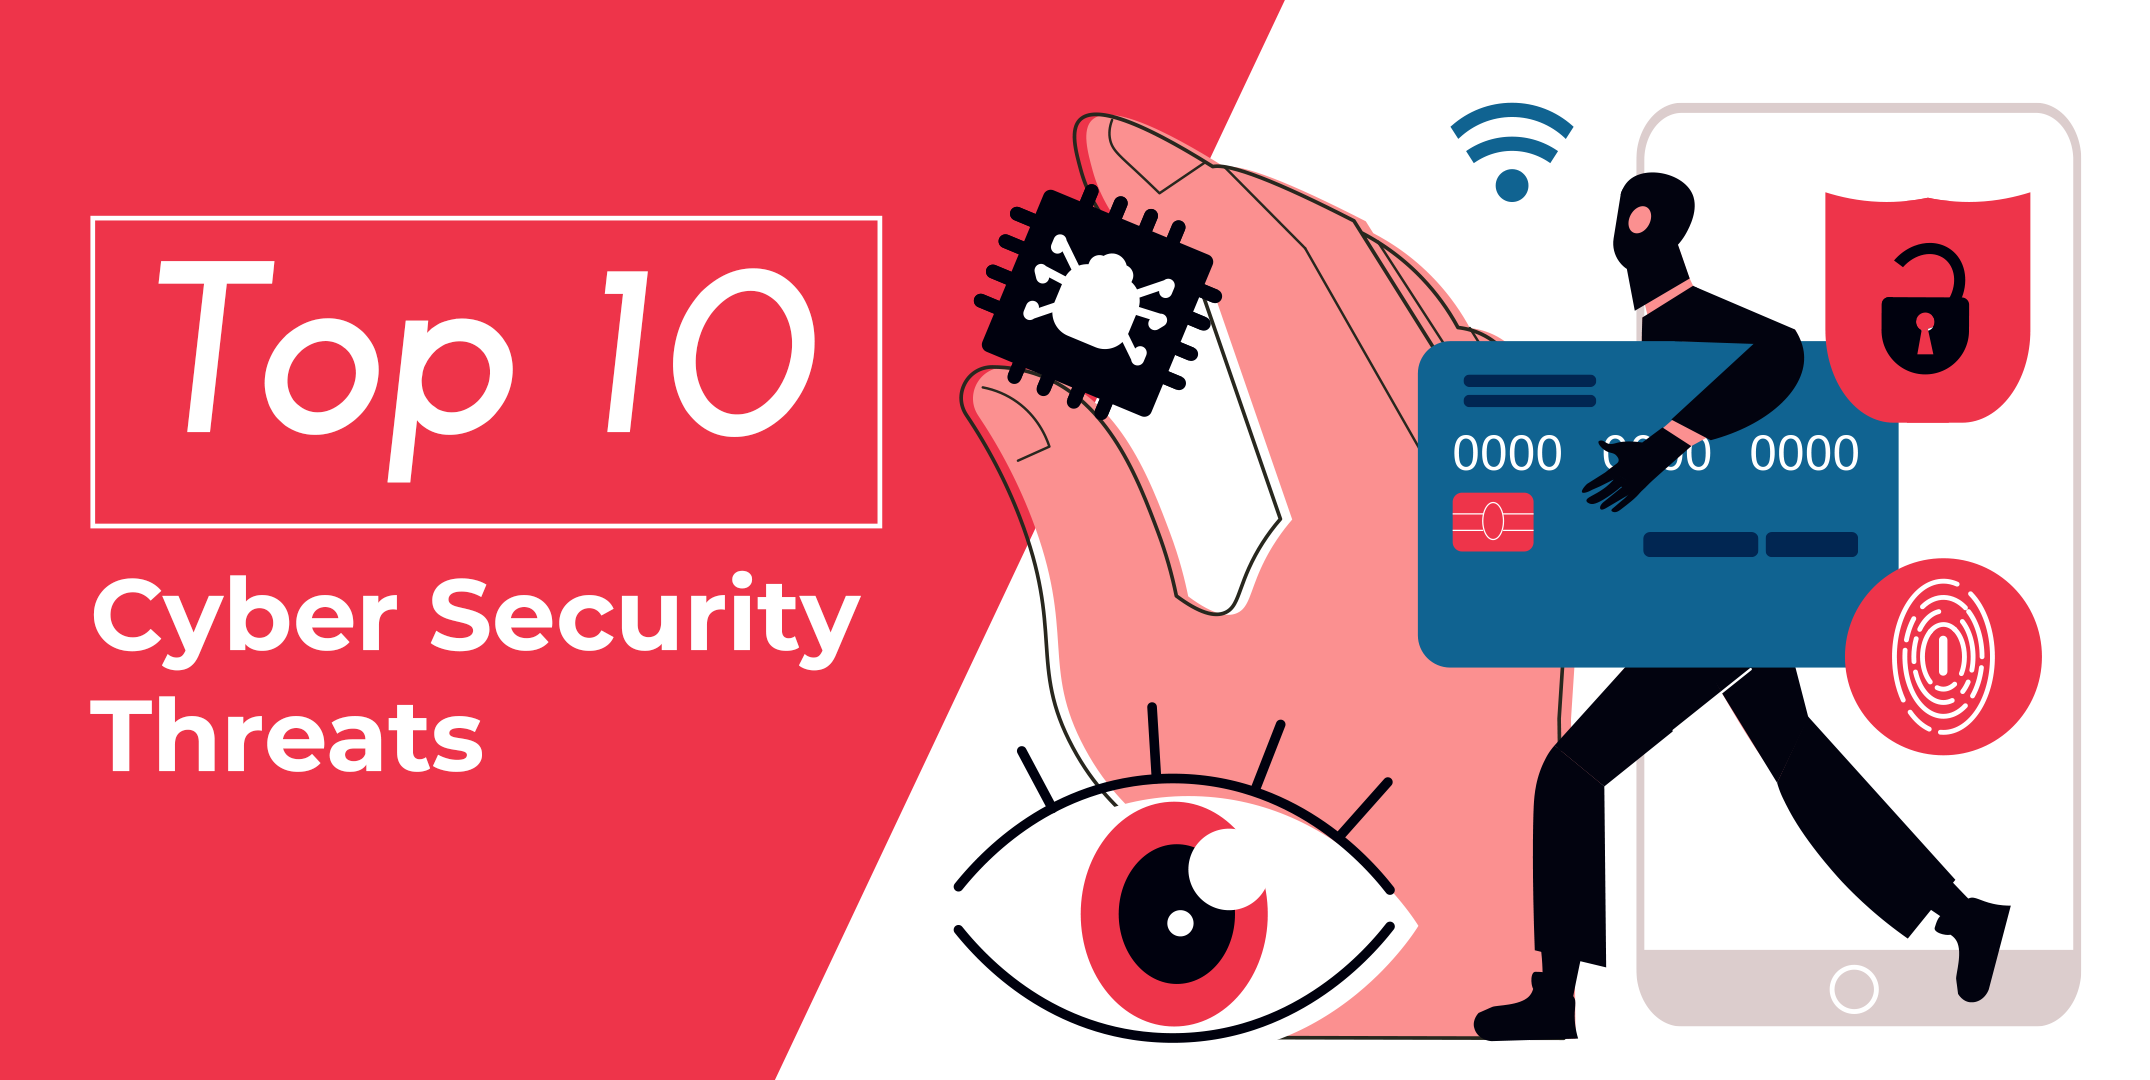 Top 10 Cyber Security Threats